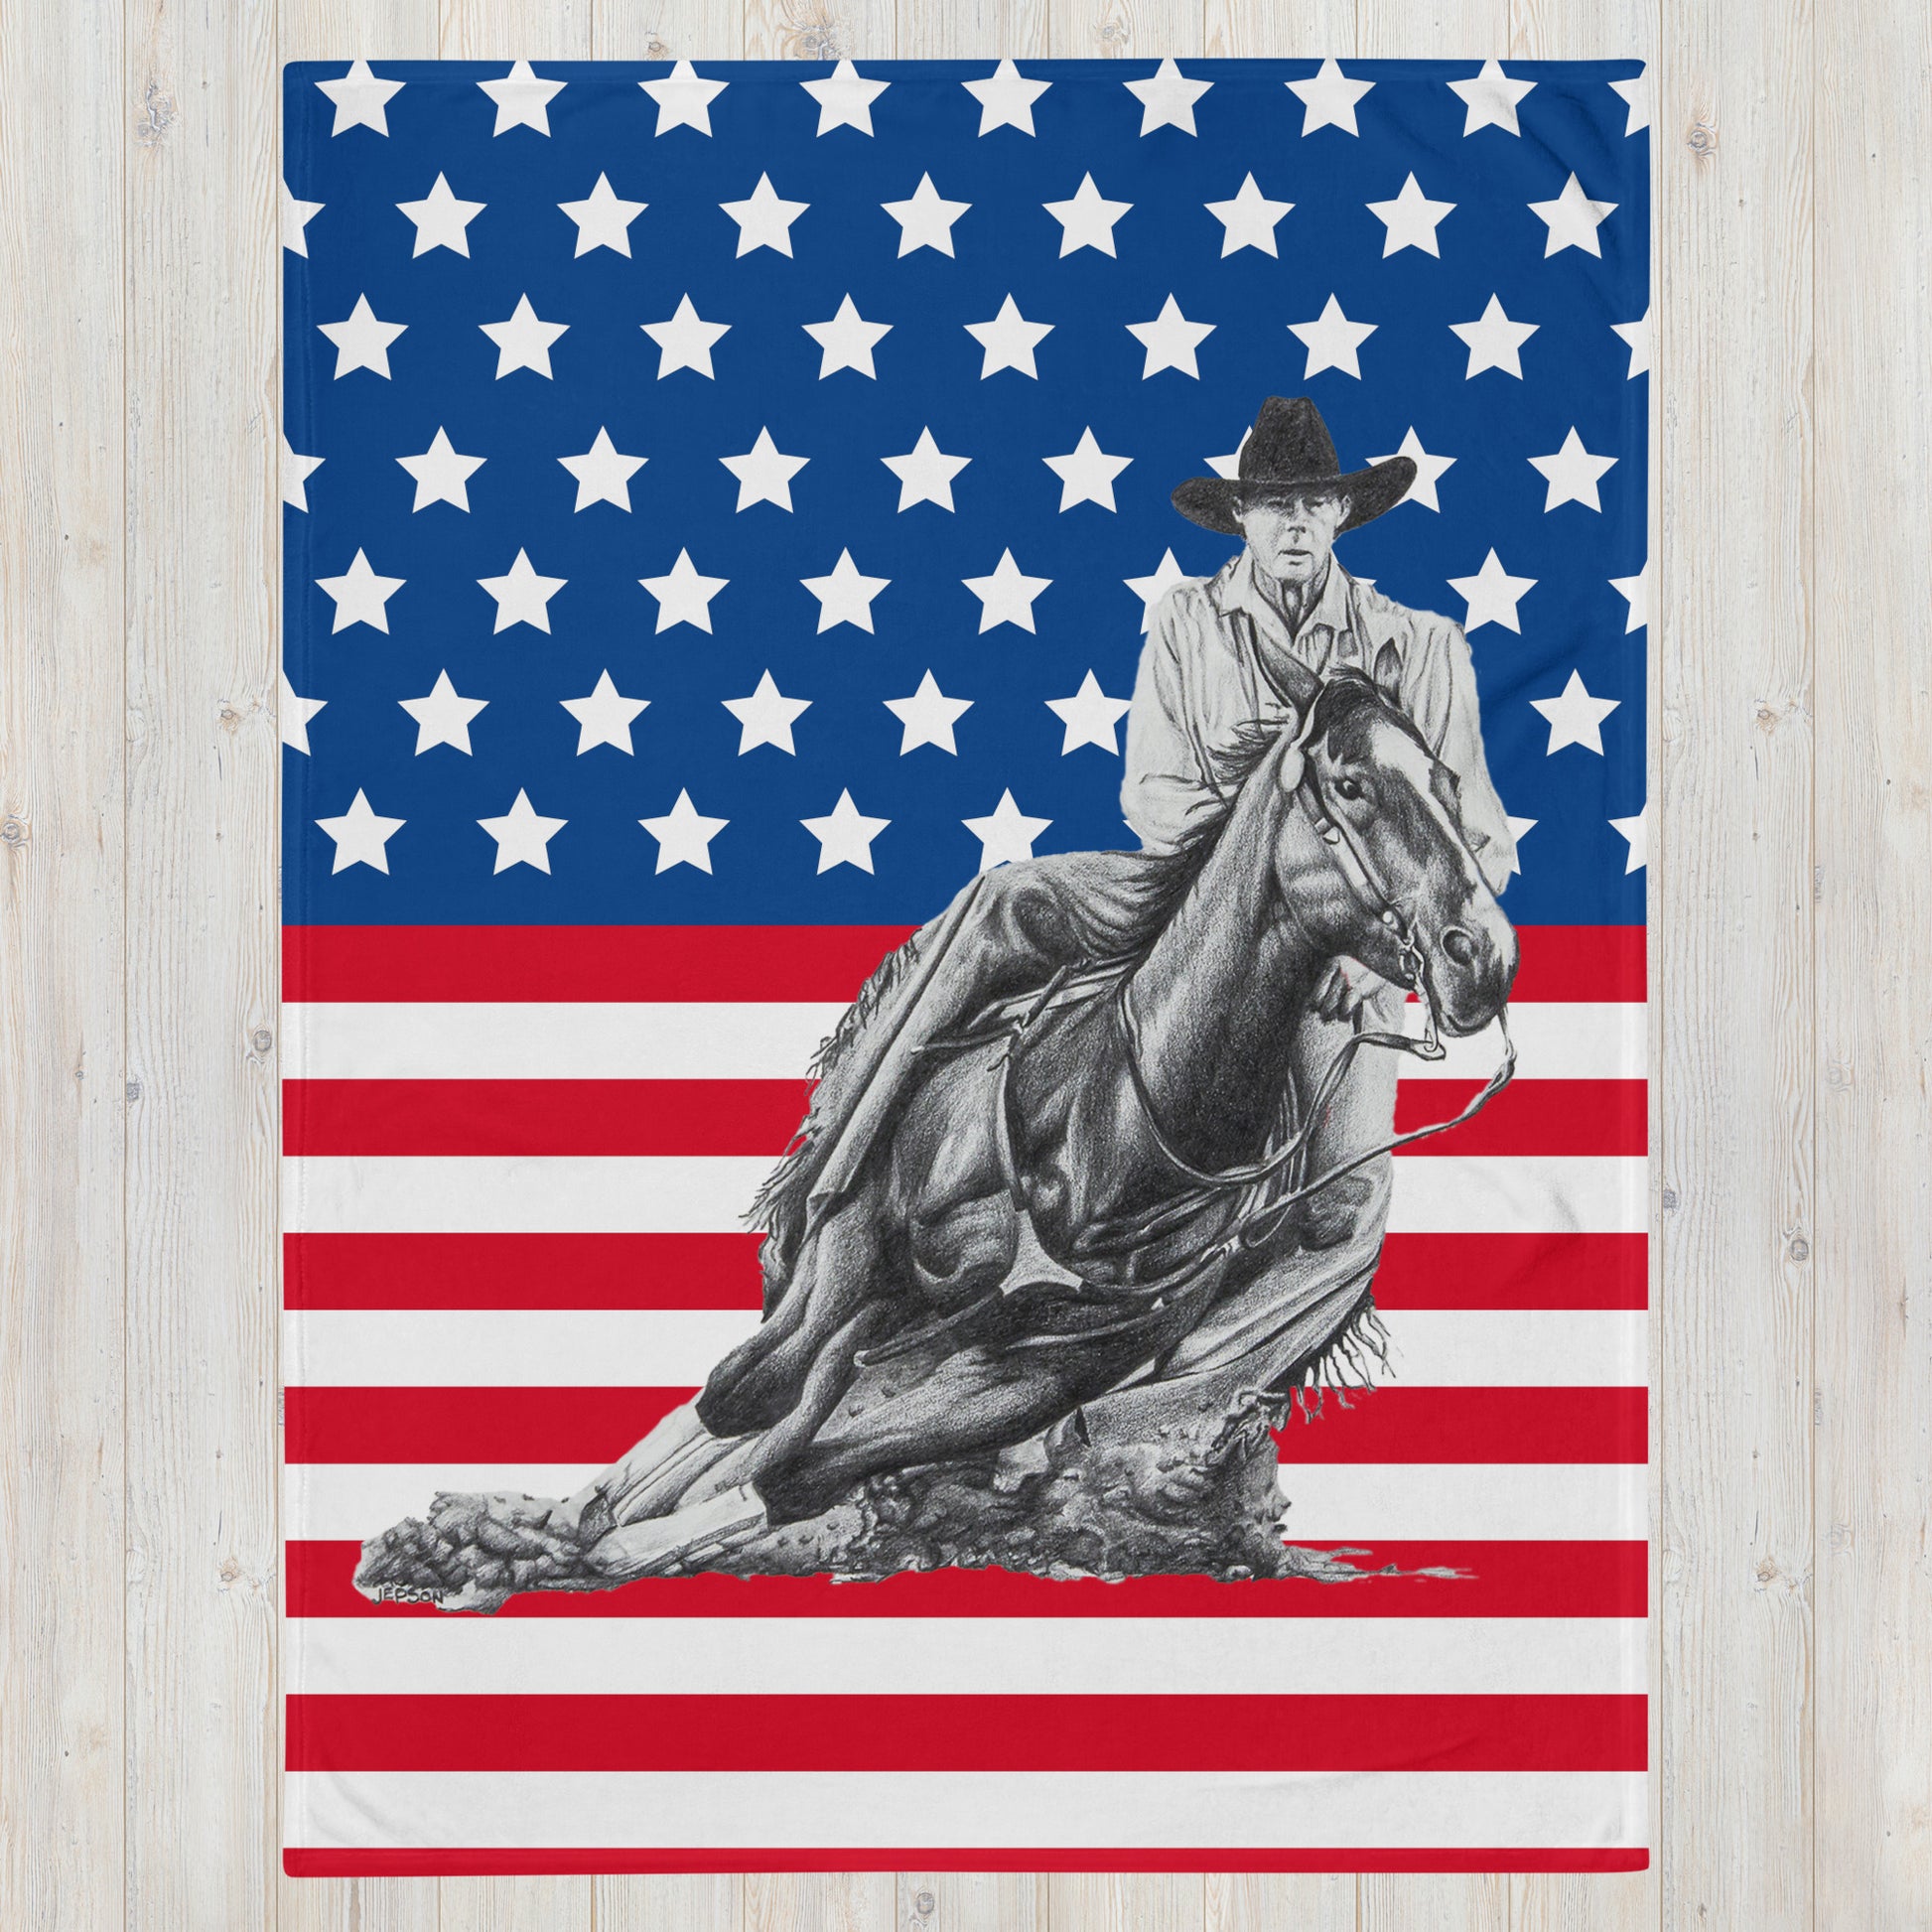  These "Cowboy Throw Blanket" are from a drawing of mine created with a graphite pencil. It is titled "A Cut Above" as it is a cowboy on a cutting horse. It has been digitally optimized and transferred to a poly-cotton blend canvas.